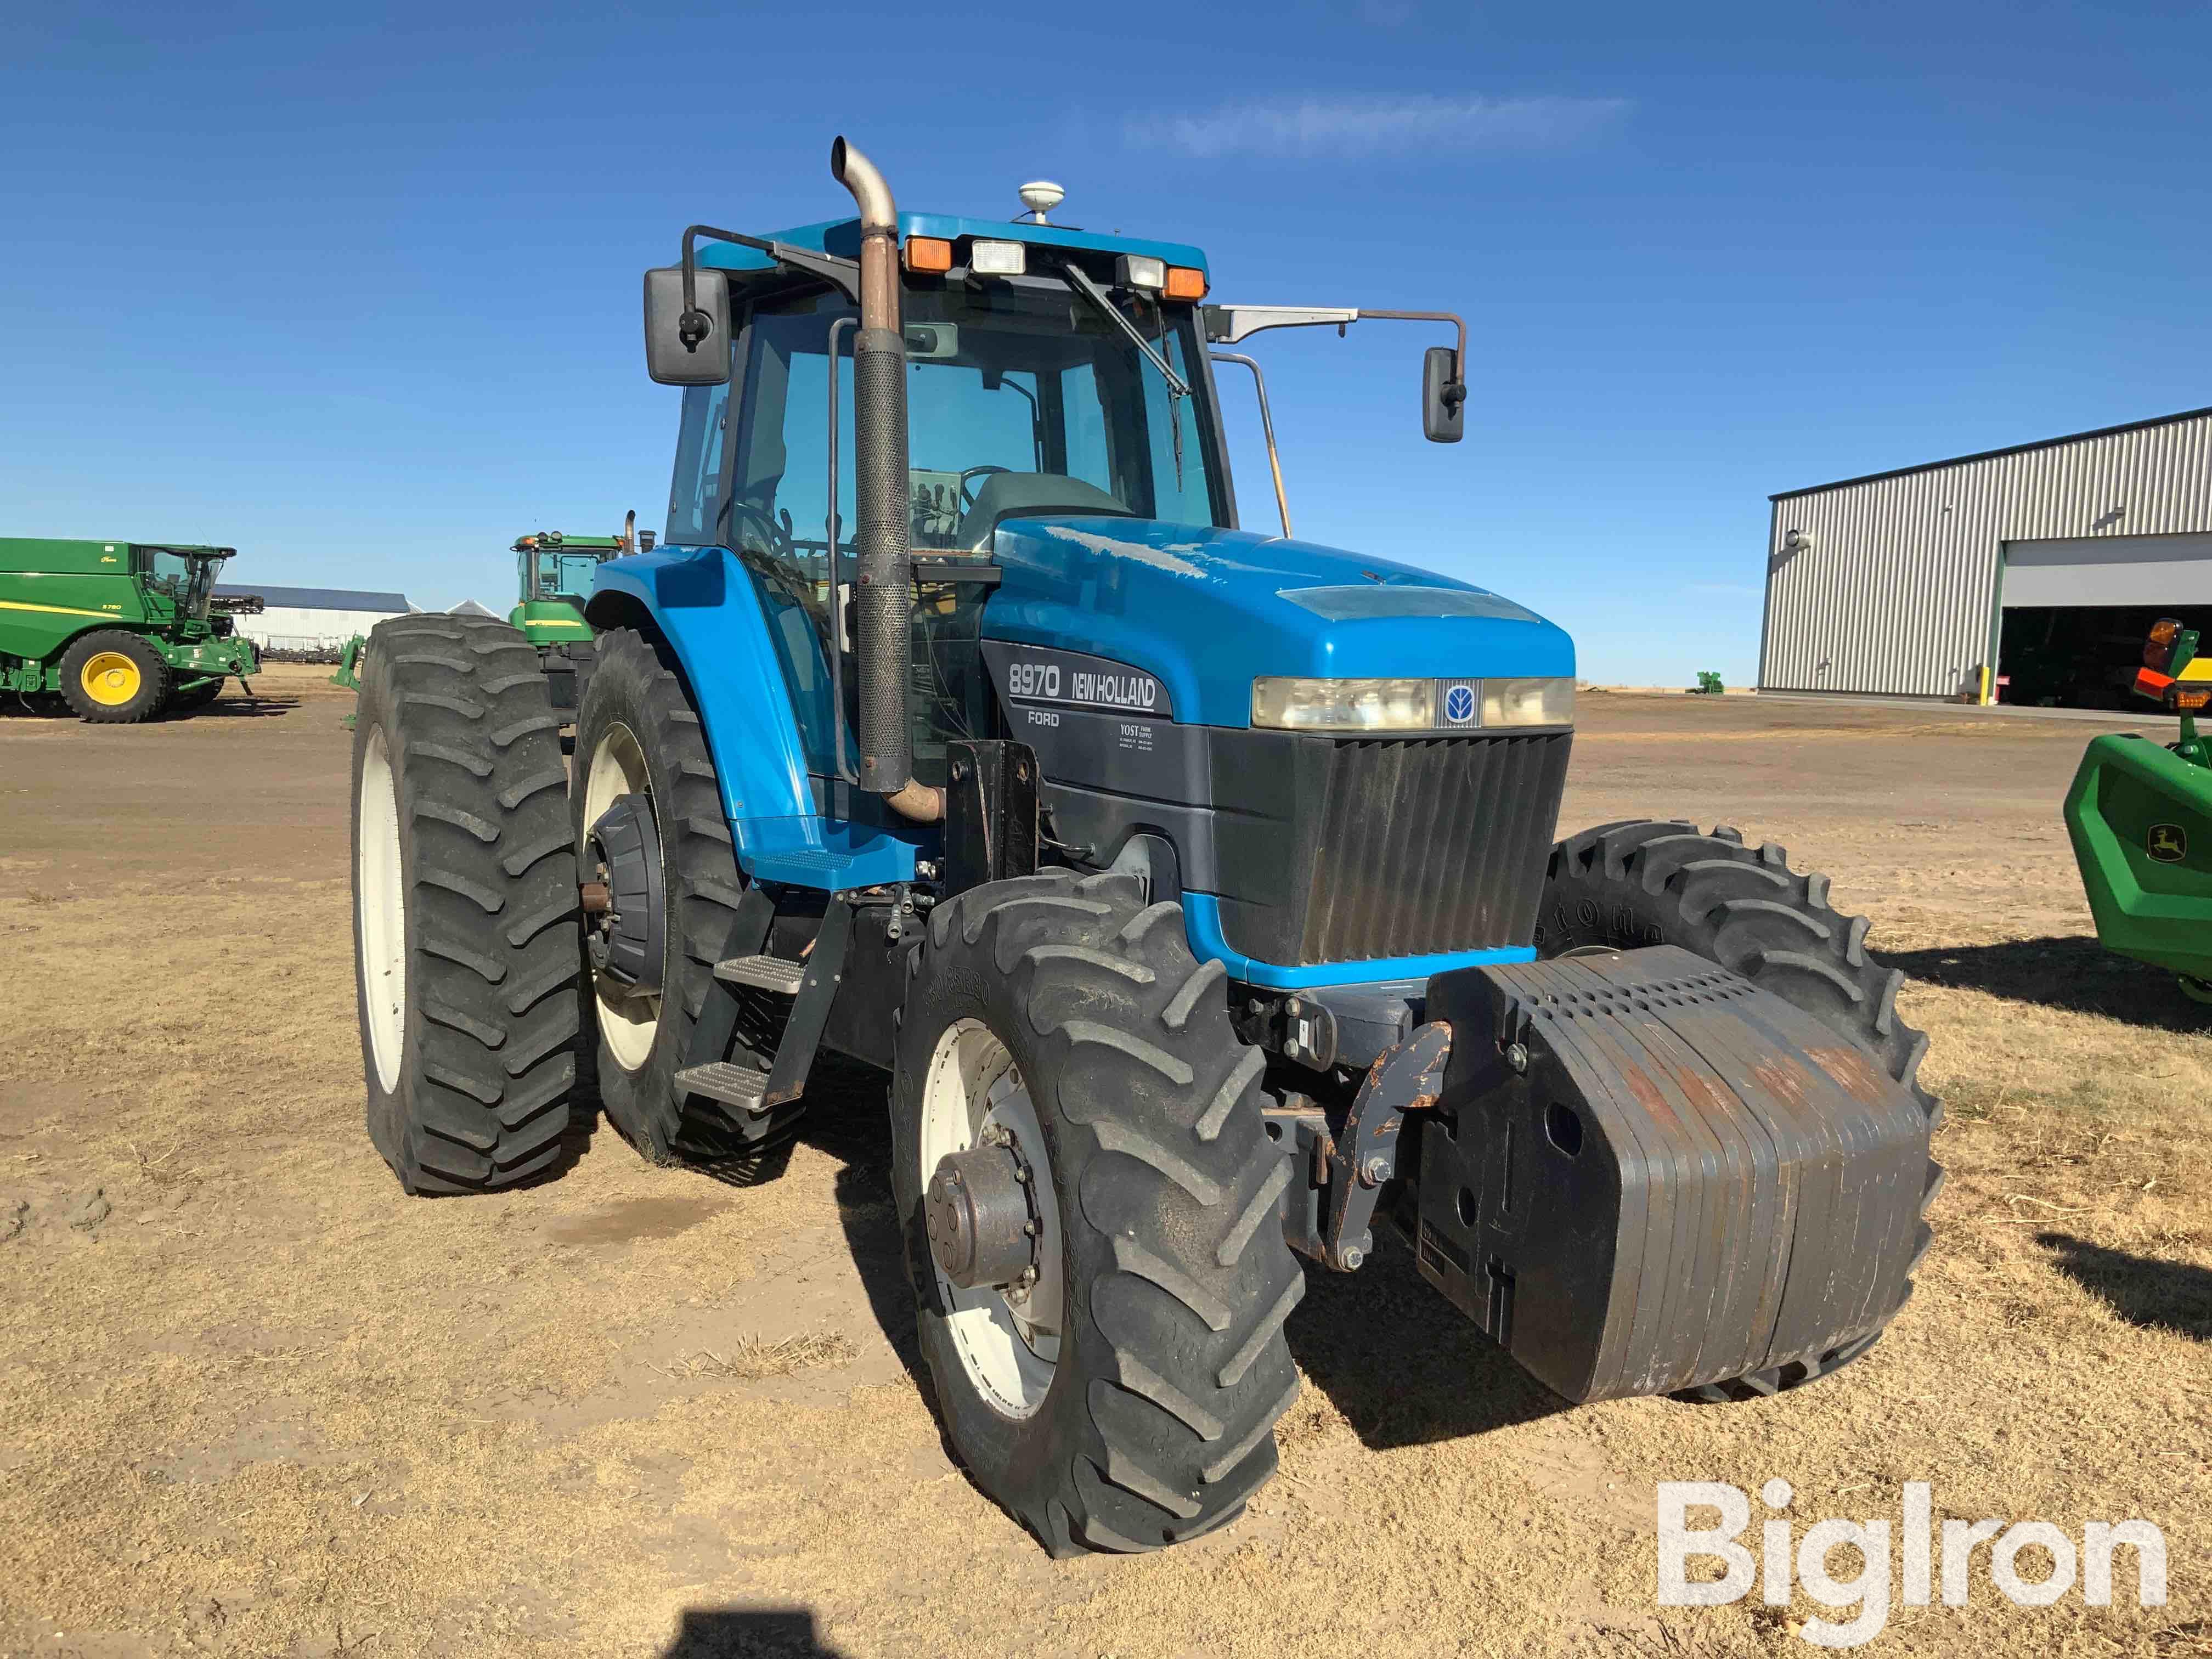 1998 New Holland 8970 MFWD Tractor BigIron Auctions